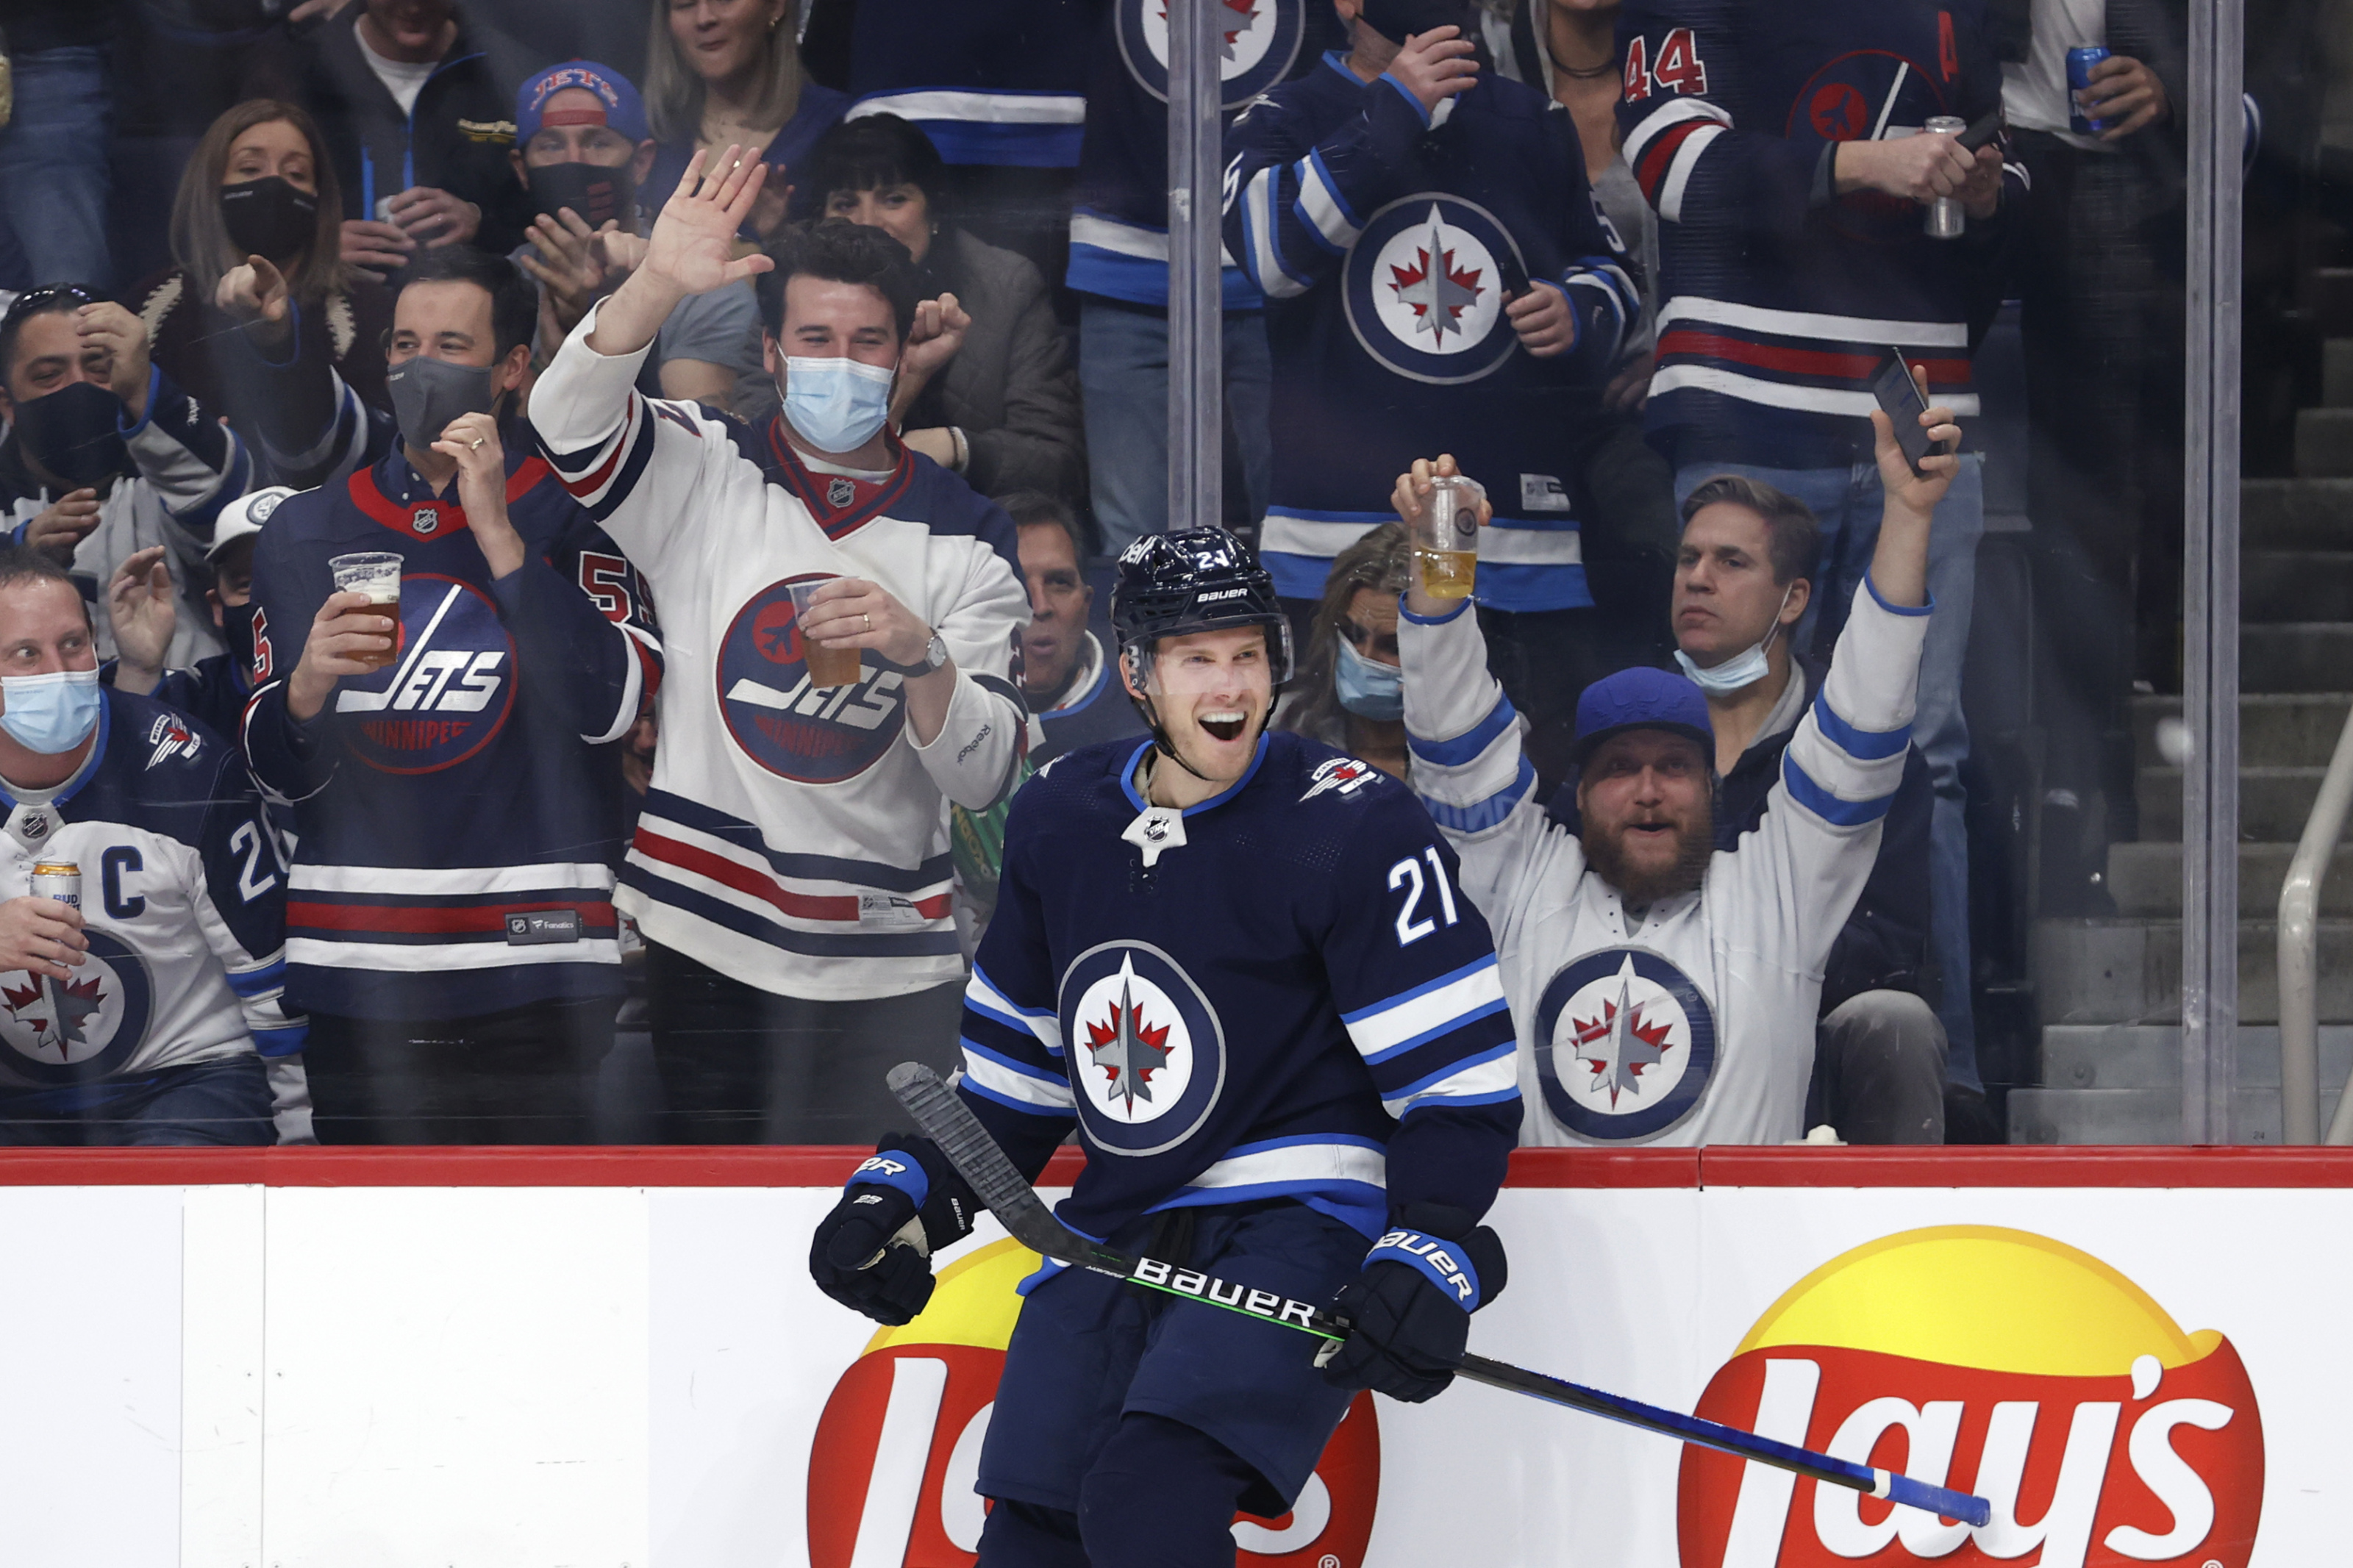 Winnipeg Jets vs St Louis Blues Preview Odds, Lineups, TV, and More